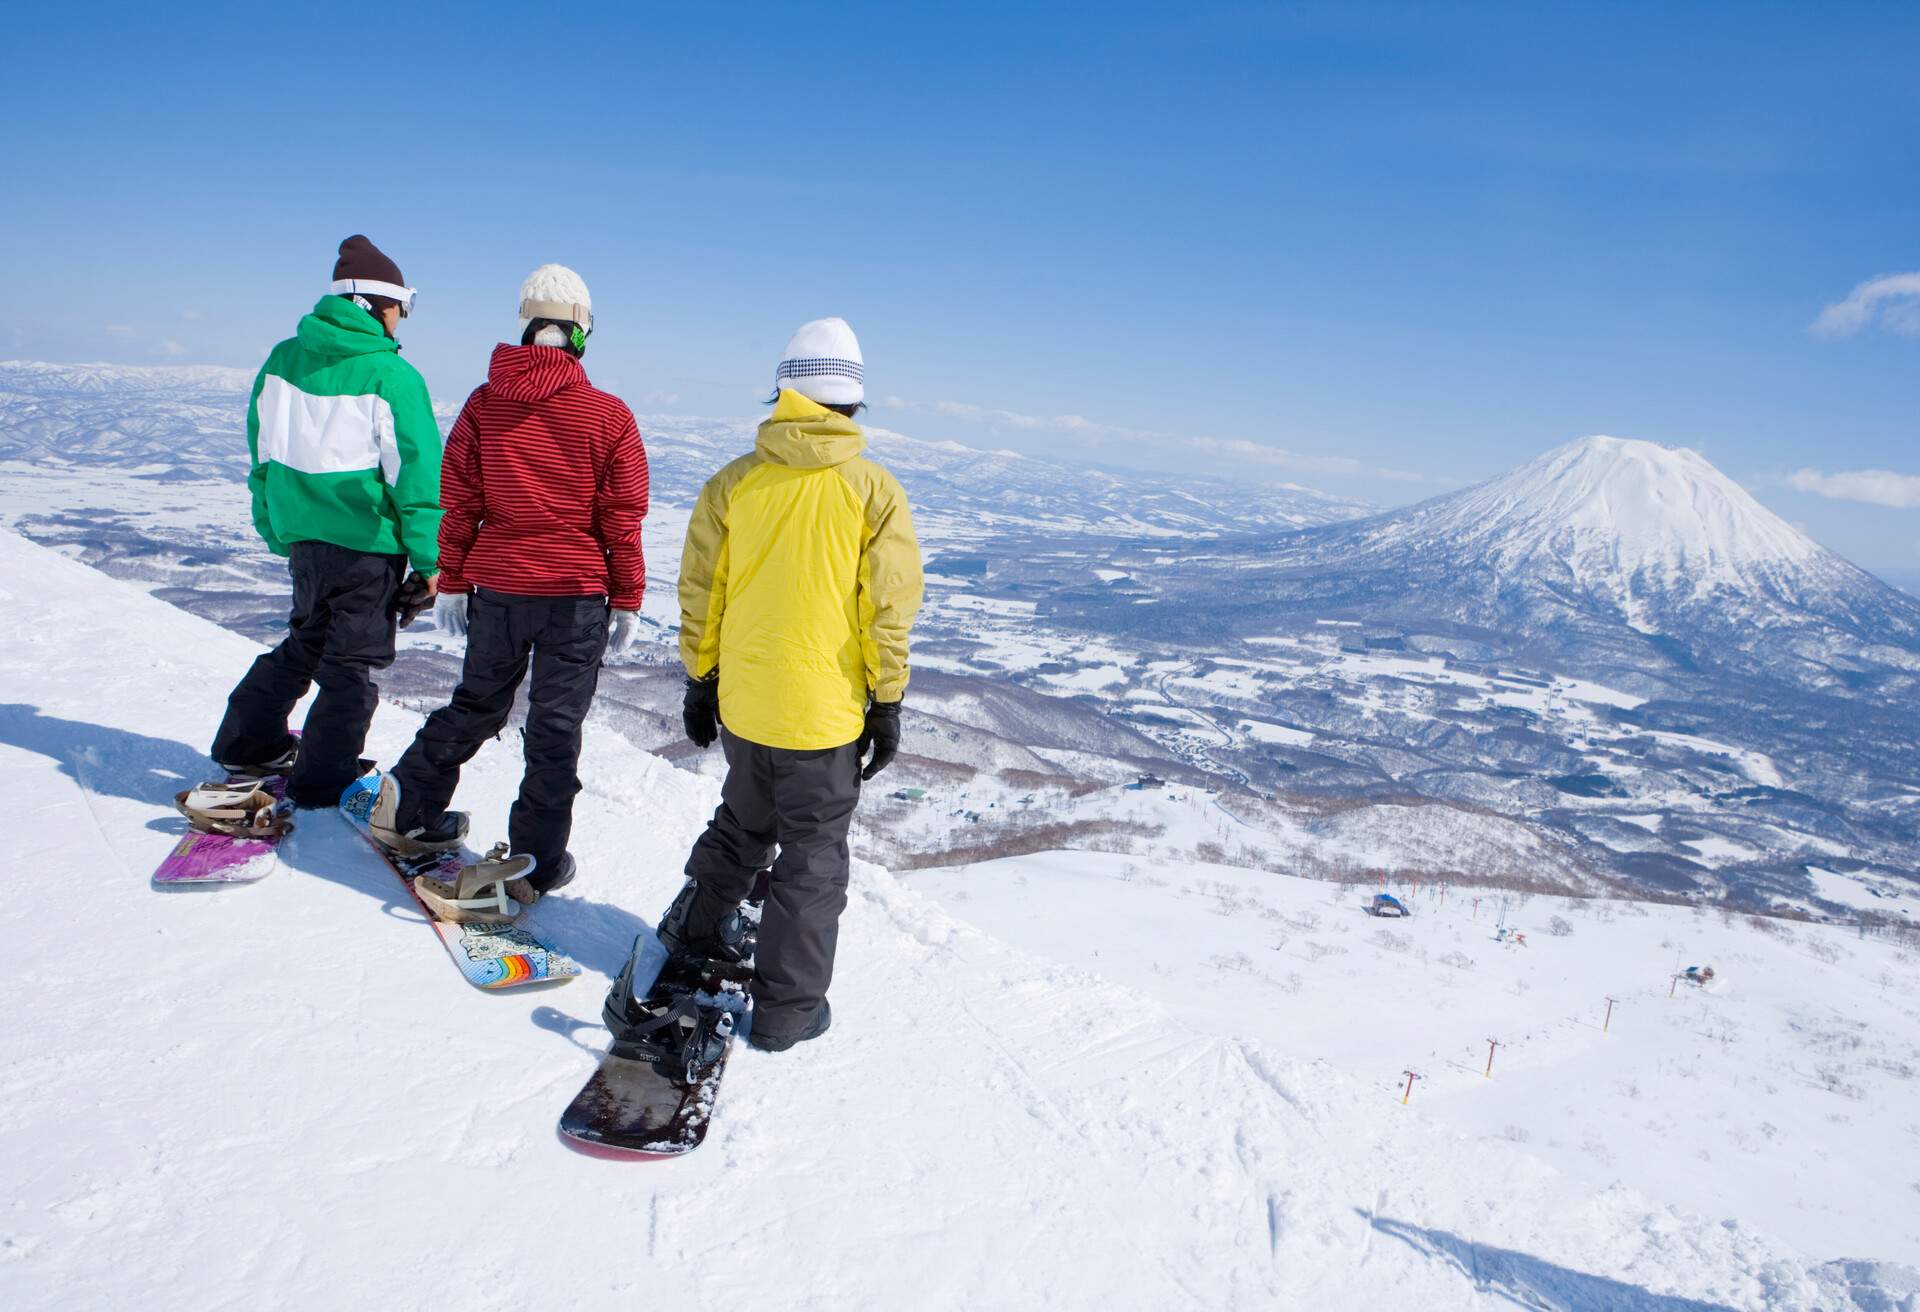 Three male friends in winter clothes stand on their snowboards on a snow-covered mountain looking at the ice-capped coned shape volcano below.